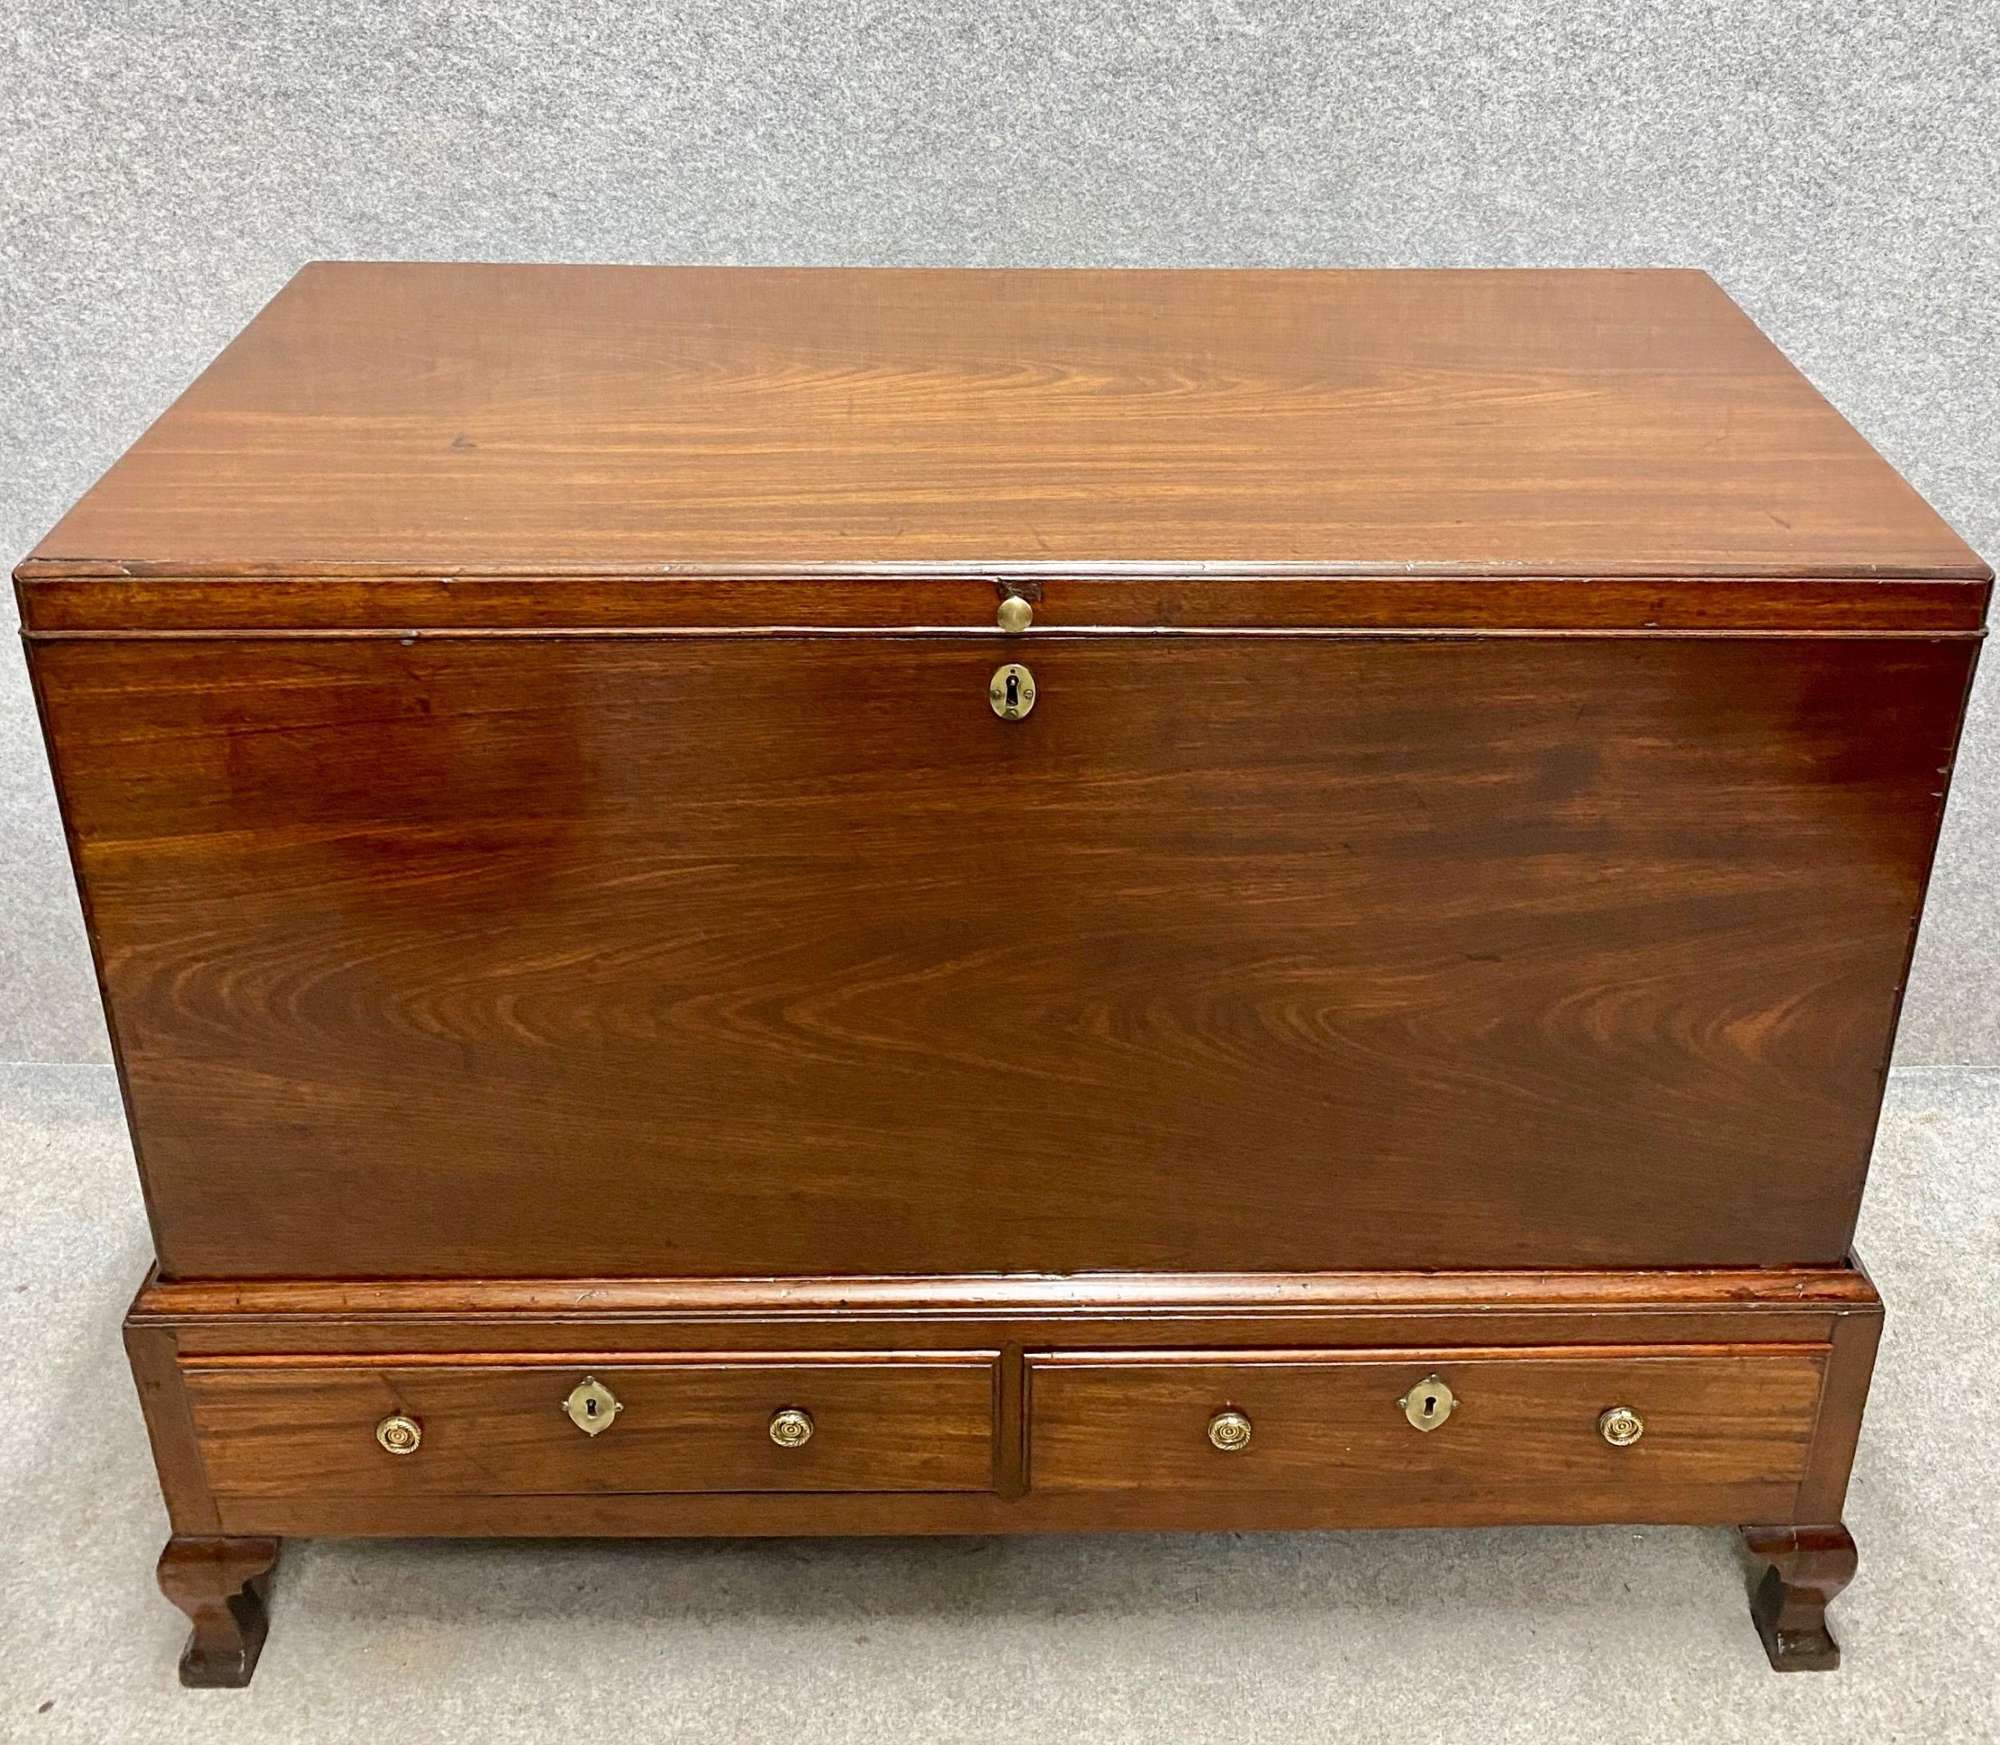 Beautifully Figured Mahogany 18th C. Silver Chest On Stand / Blanket Box